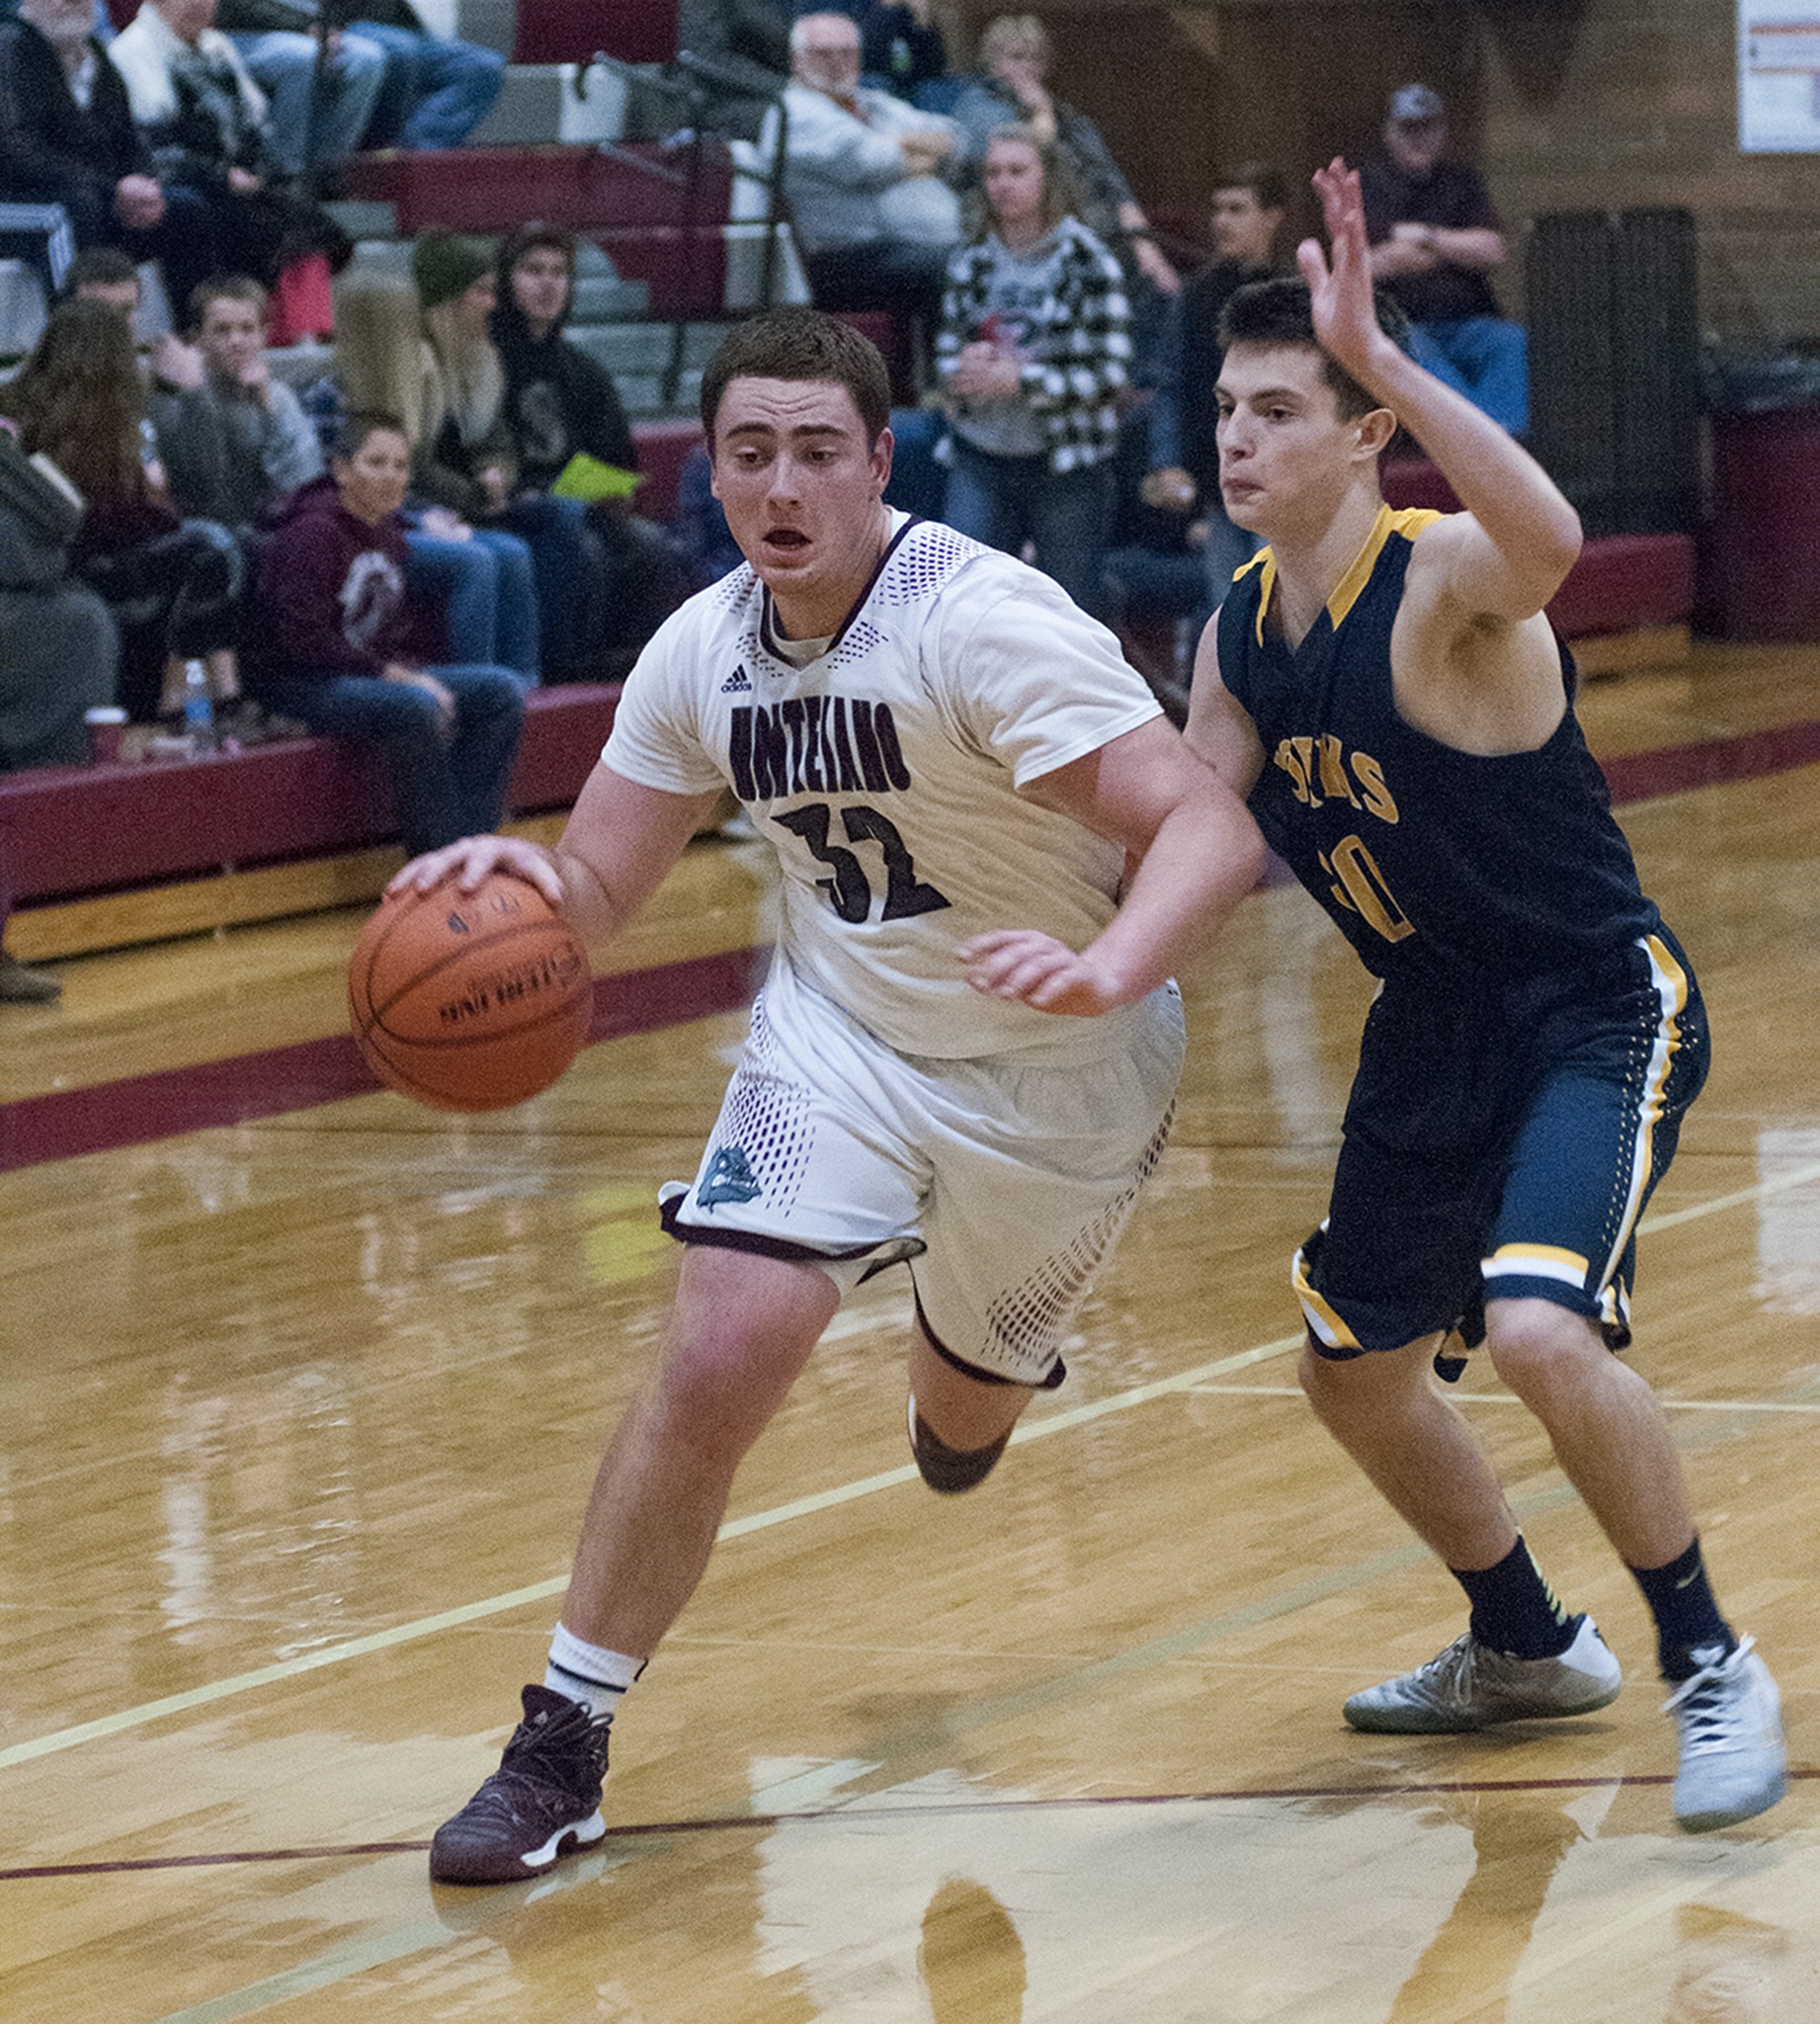 (Brendan Carl | The Daily World) Montesano’s L.J. Valley drives for the basket during Friday night’s Evergreen 1A League contest at Bo Griffith Memorial Gym in Montesano.